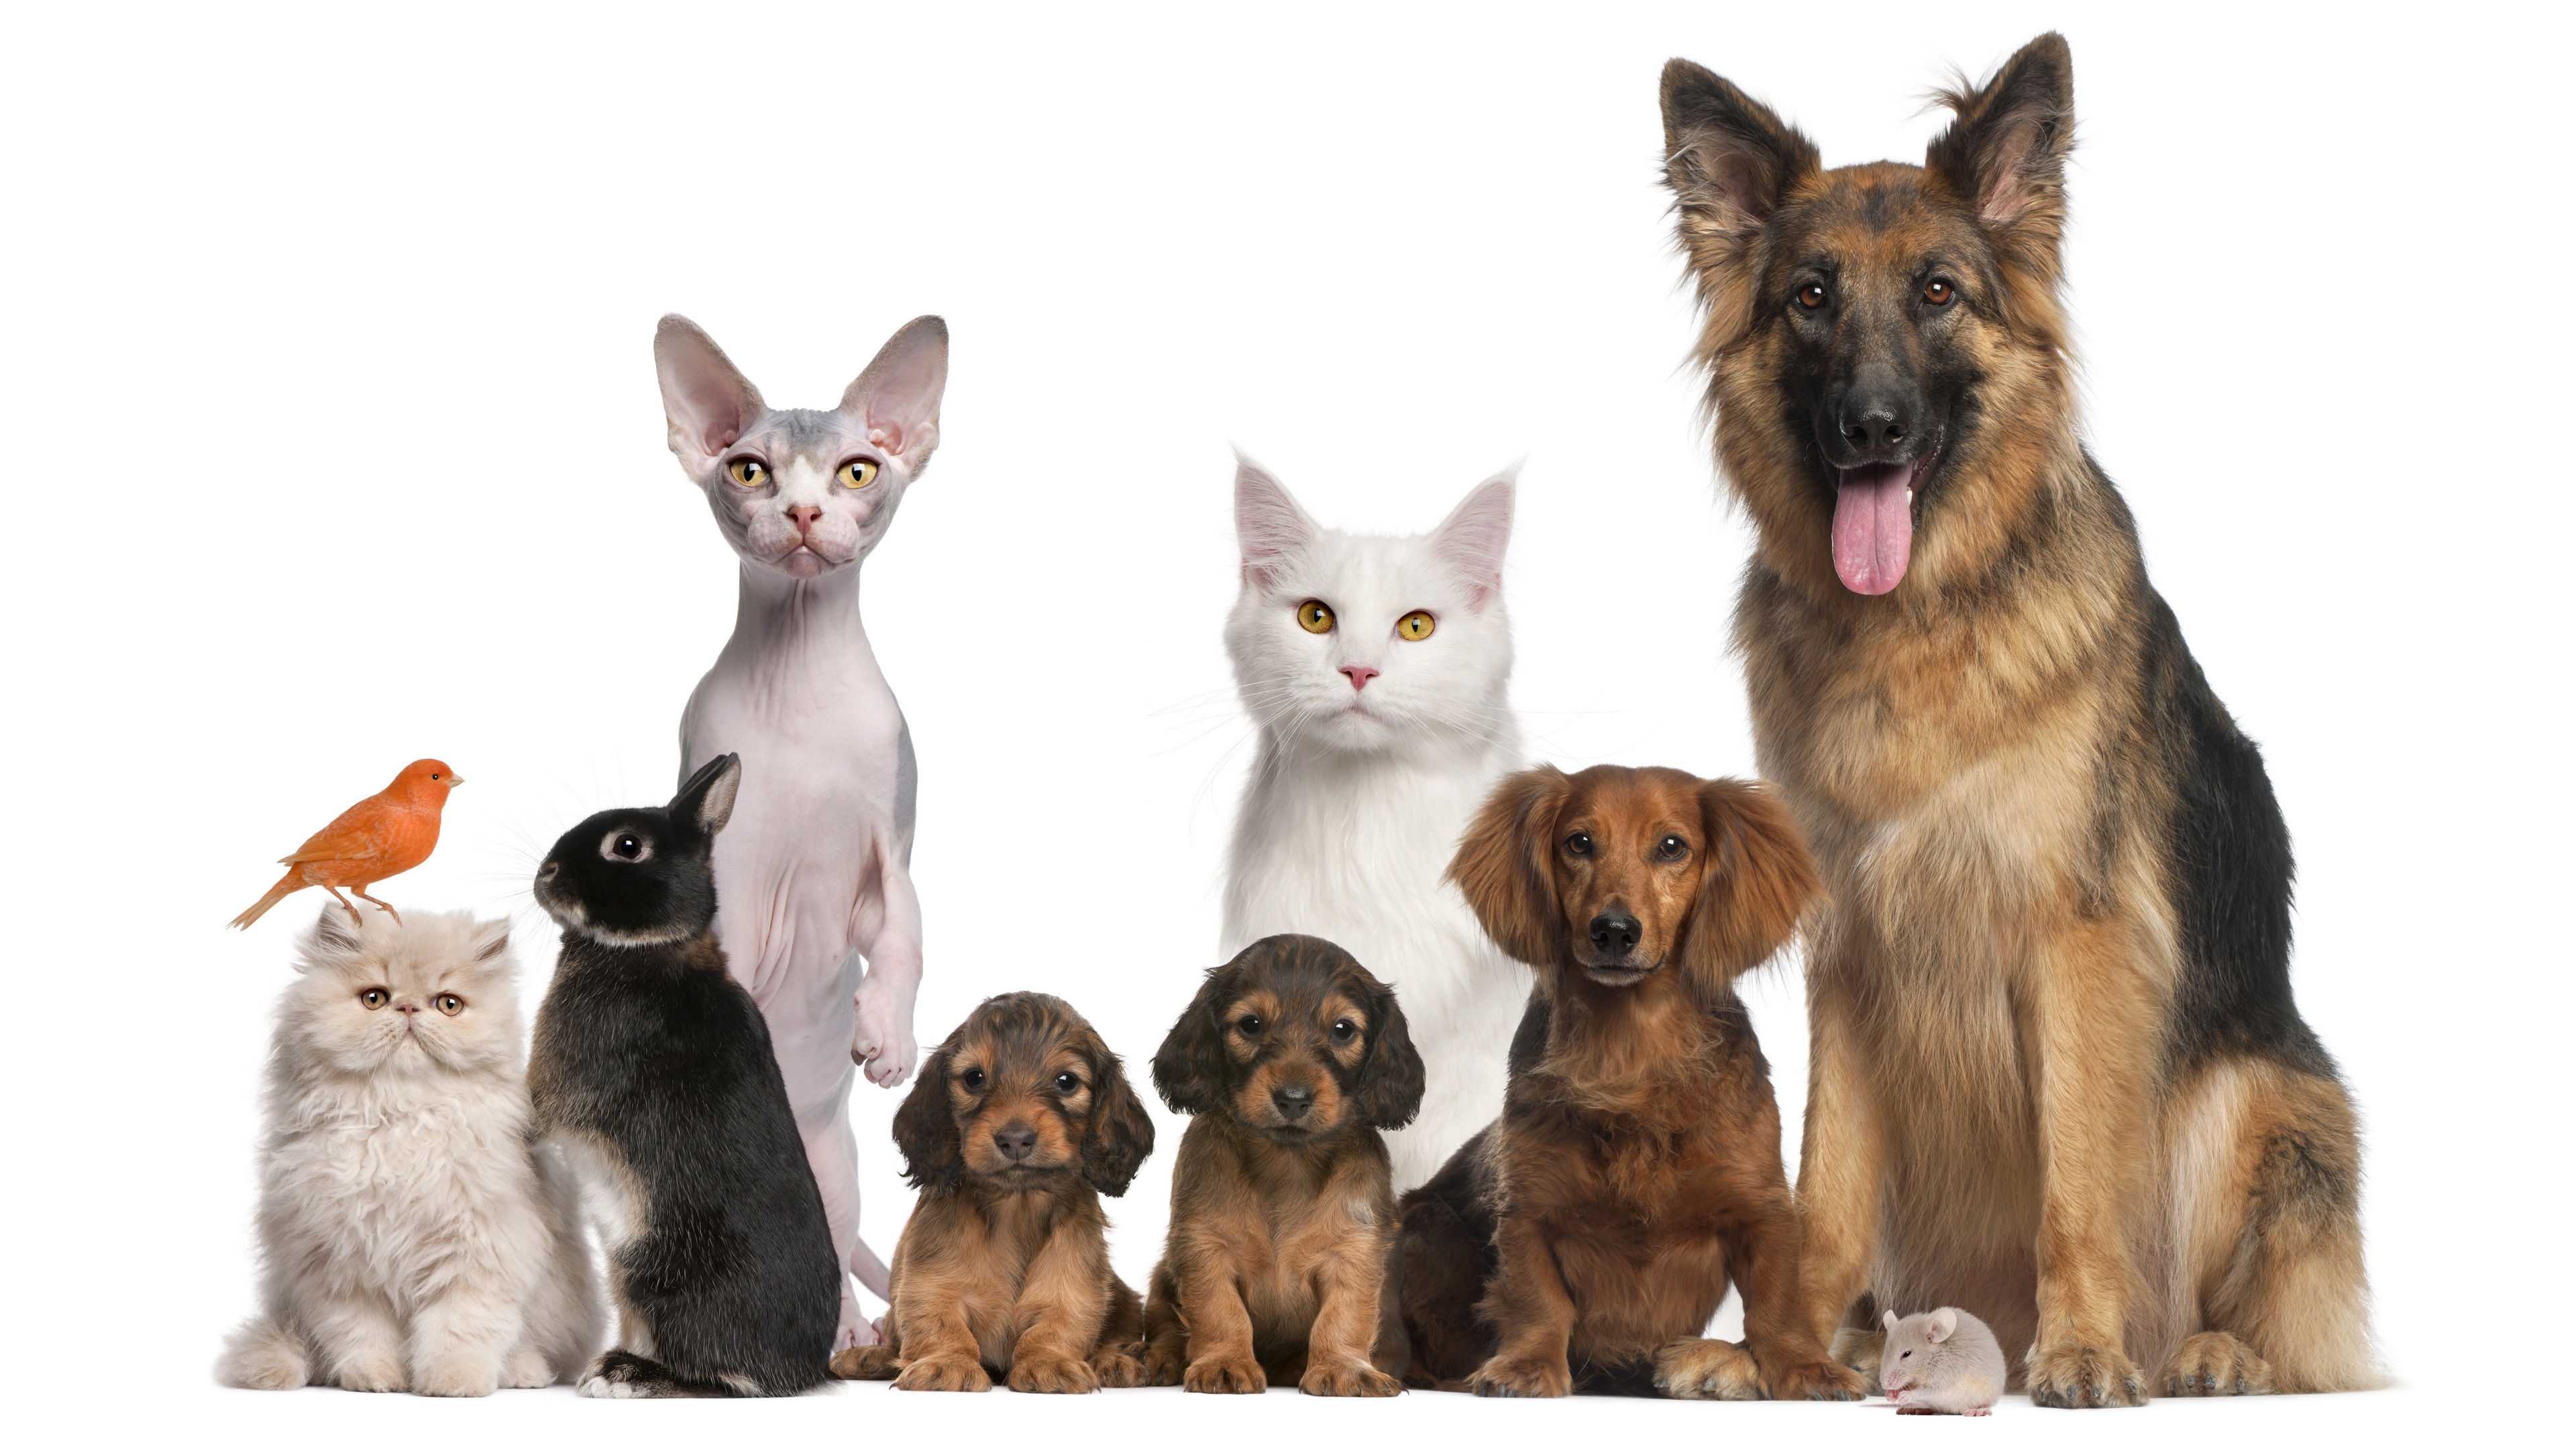 General 3840x2160 dog puppies cats rabbits birds mice animals mammals simple background white background